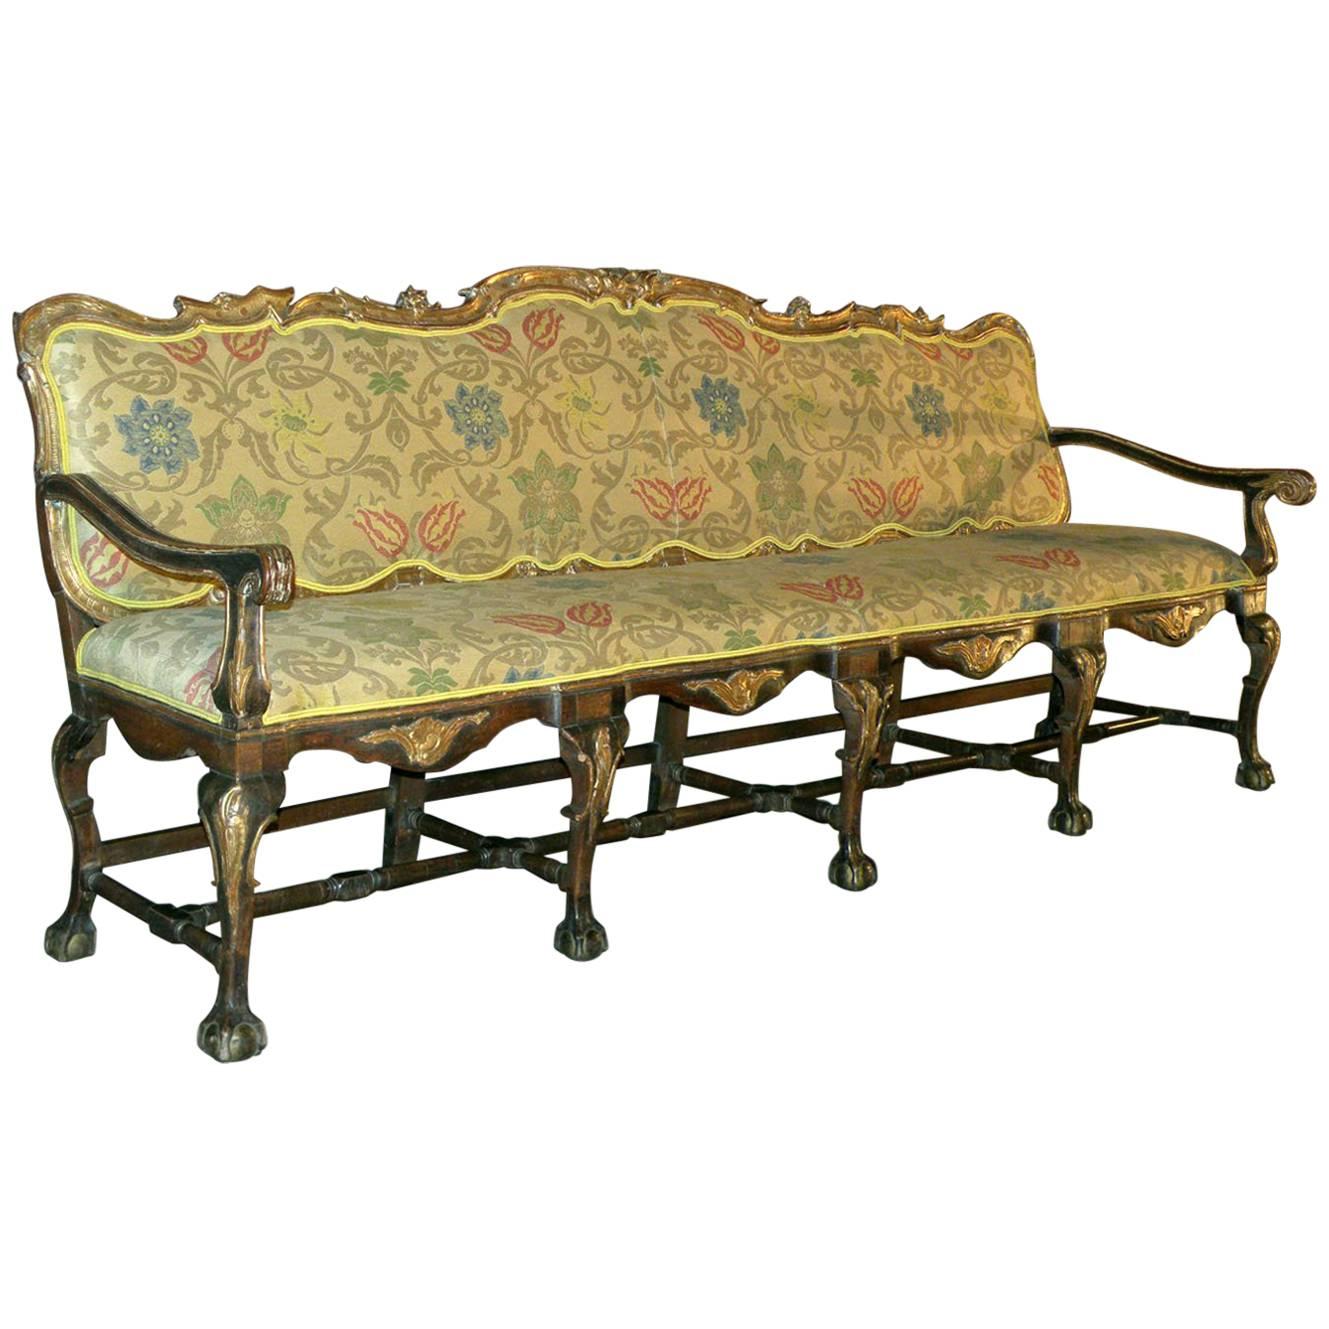 Long 18th Century Carved and Parcel-Gilt Spanish / Portuguese Settee